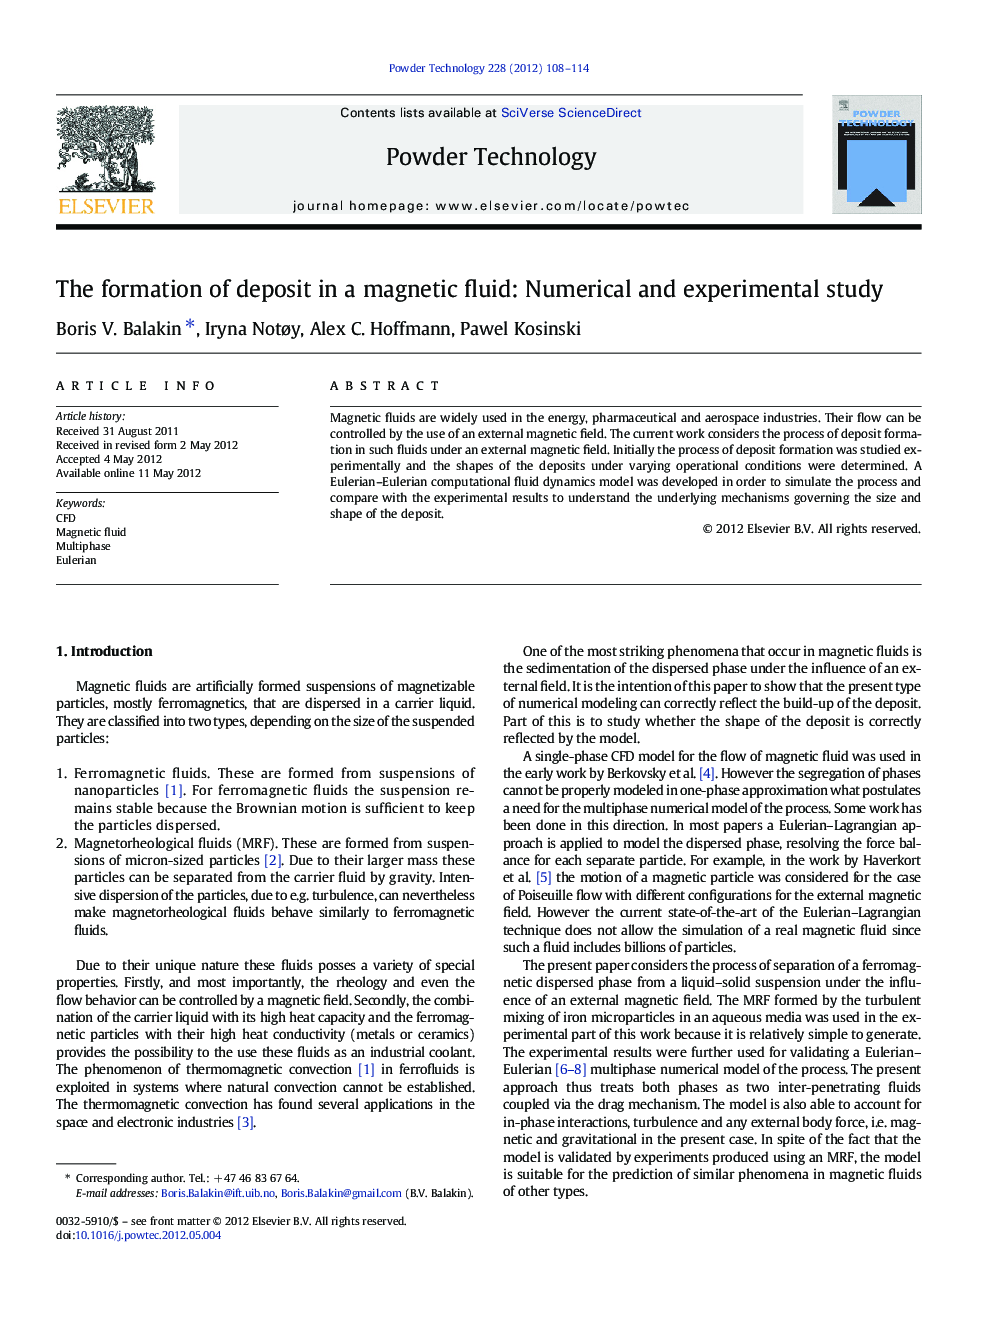 The formation of deposit in a magnetic fluid: Numerical and experimental study